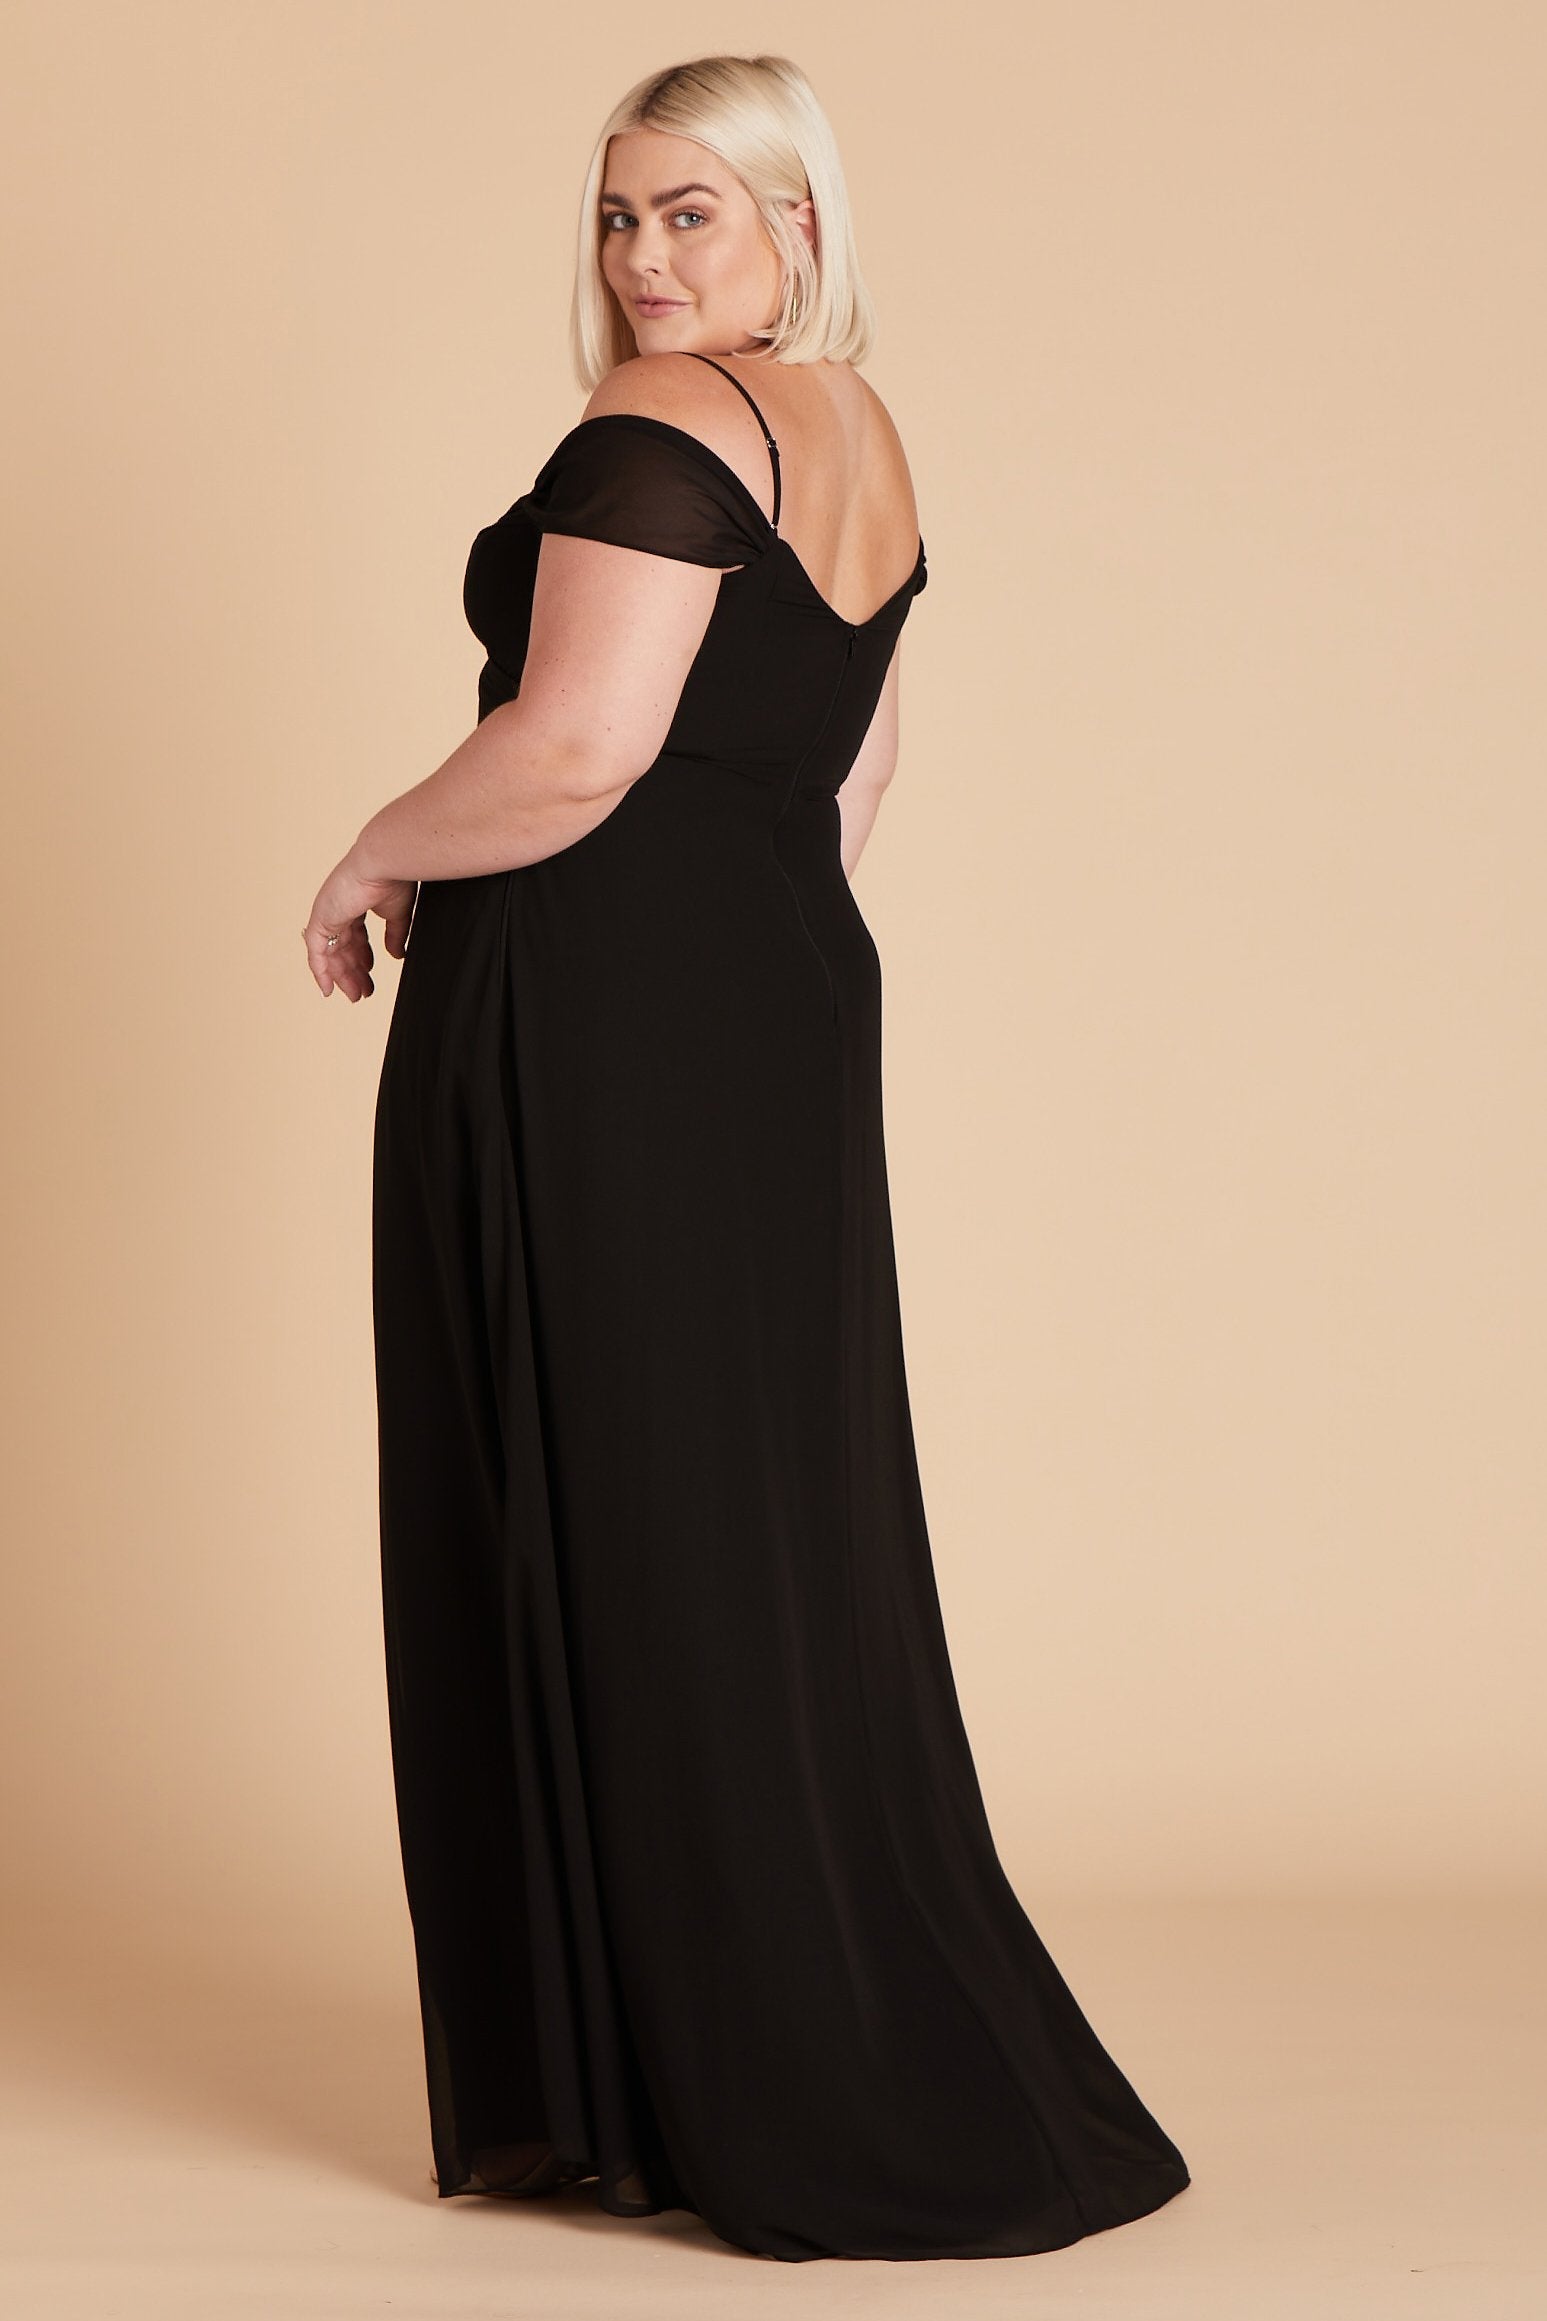 Spence convertible plus size bridesmaid dress in black chiffon by Birdy Grey, side view